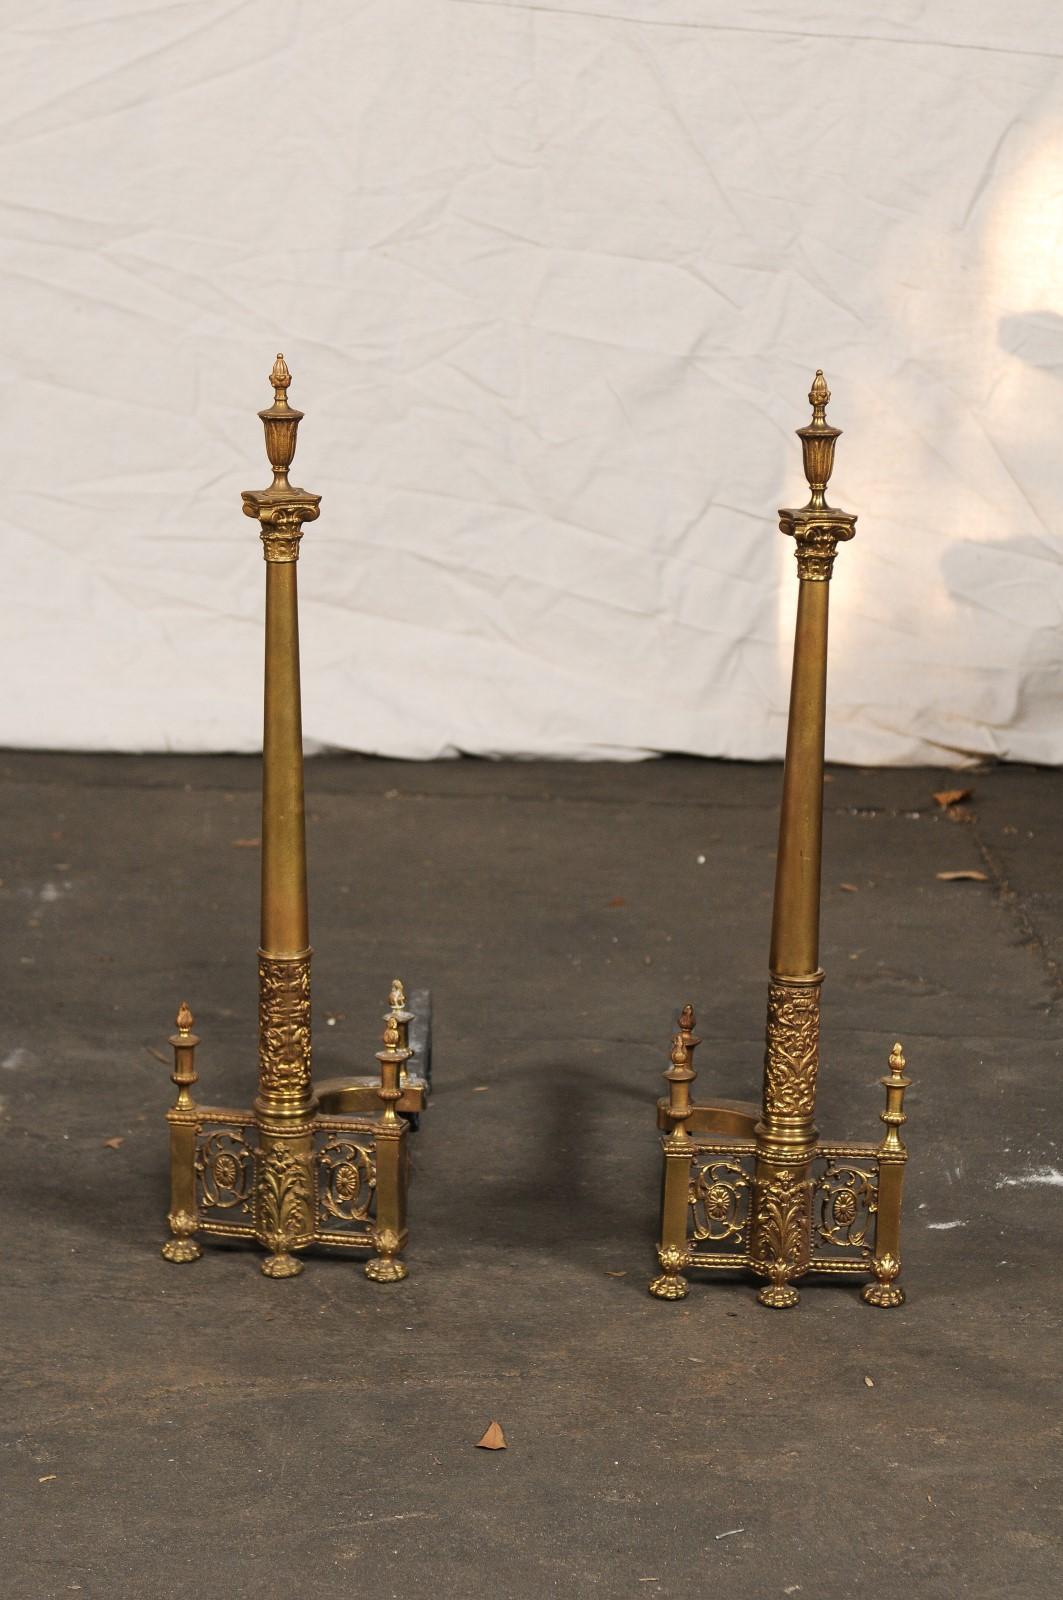 19th-20th Century Neoclassical Brass Andirons, Columns with Flaming Urns 1